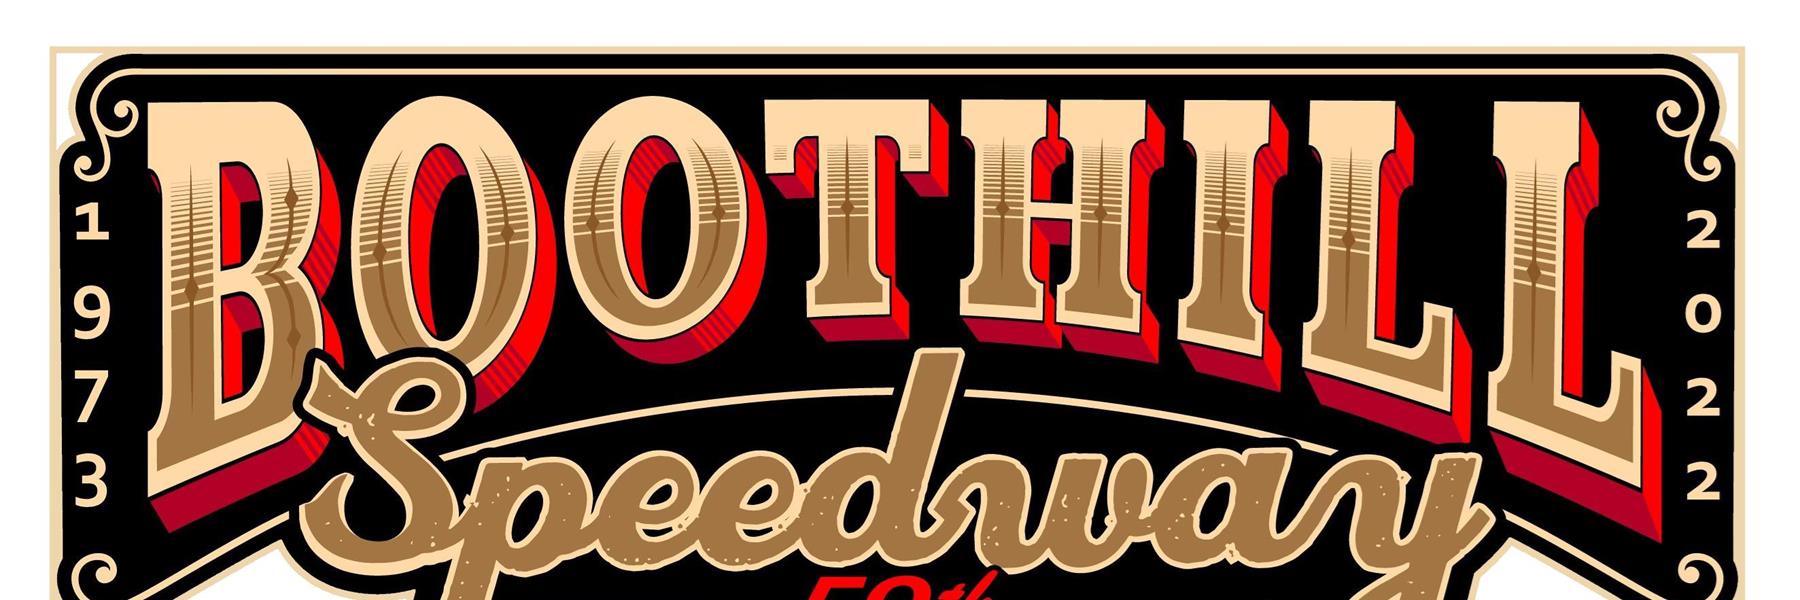 9/23/2022 - Boothill Speedway